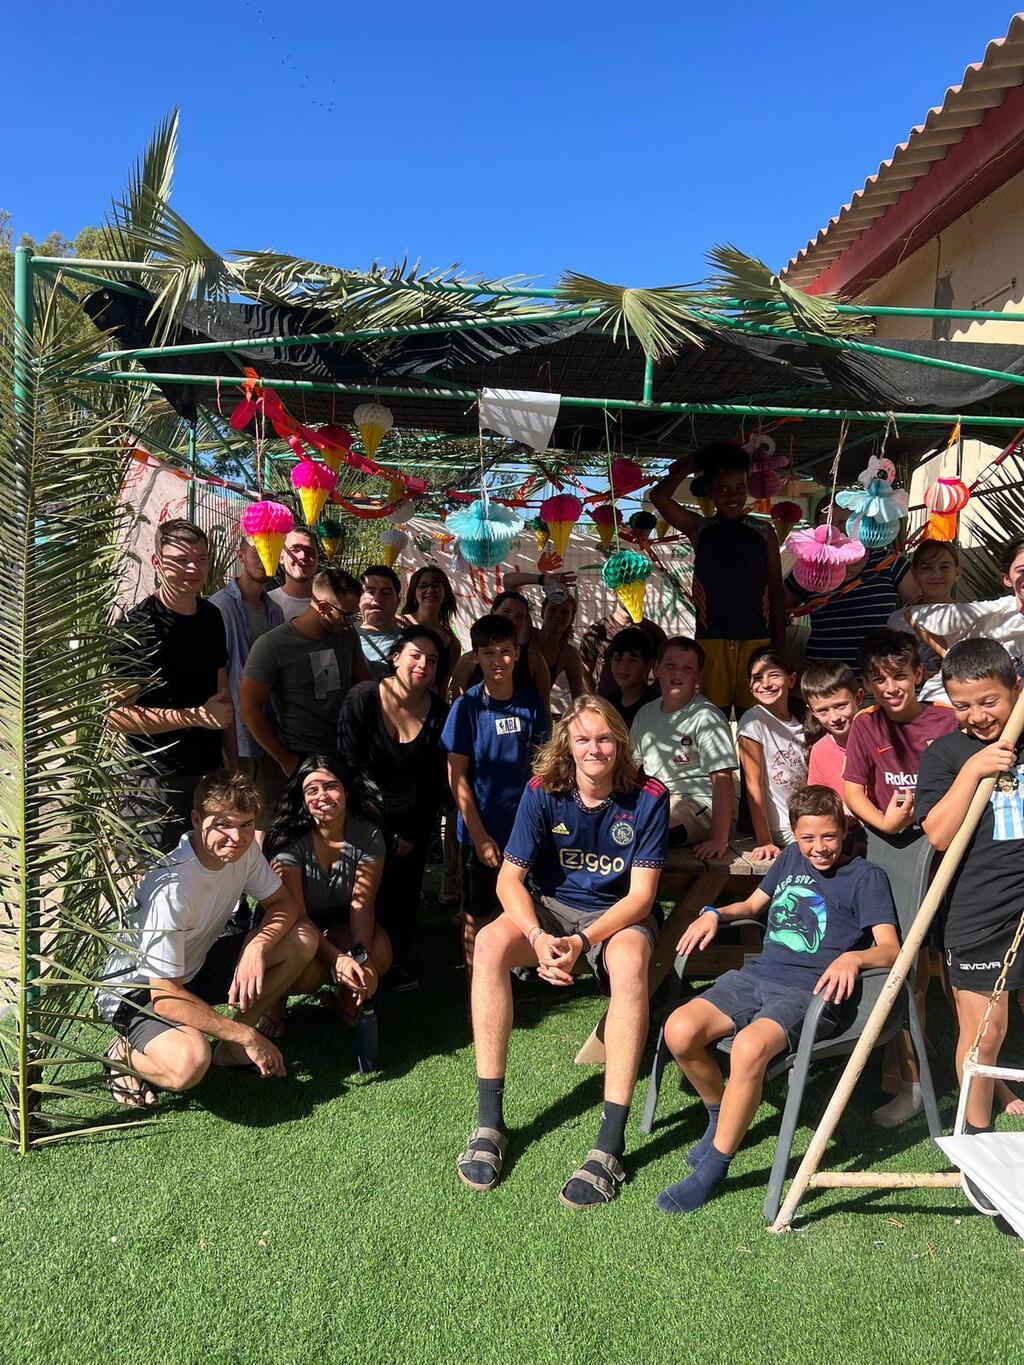 Masa Israel Journey fellows from all around the world, have already completed the building of the Sukkah in Kibbutz Yagur, where they live and volunteer, together with the children of the Kibbutz